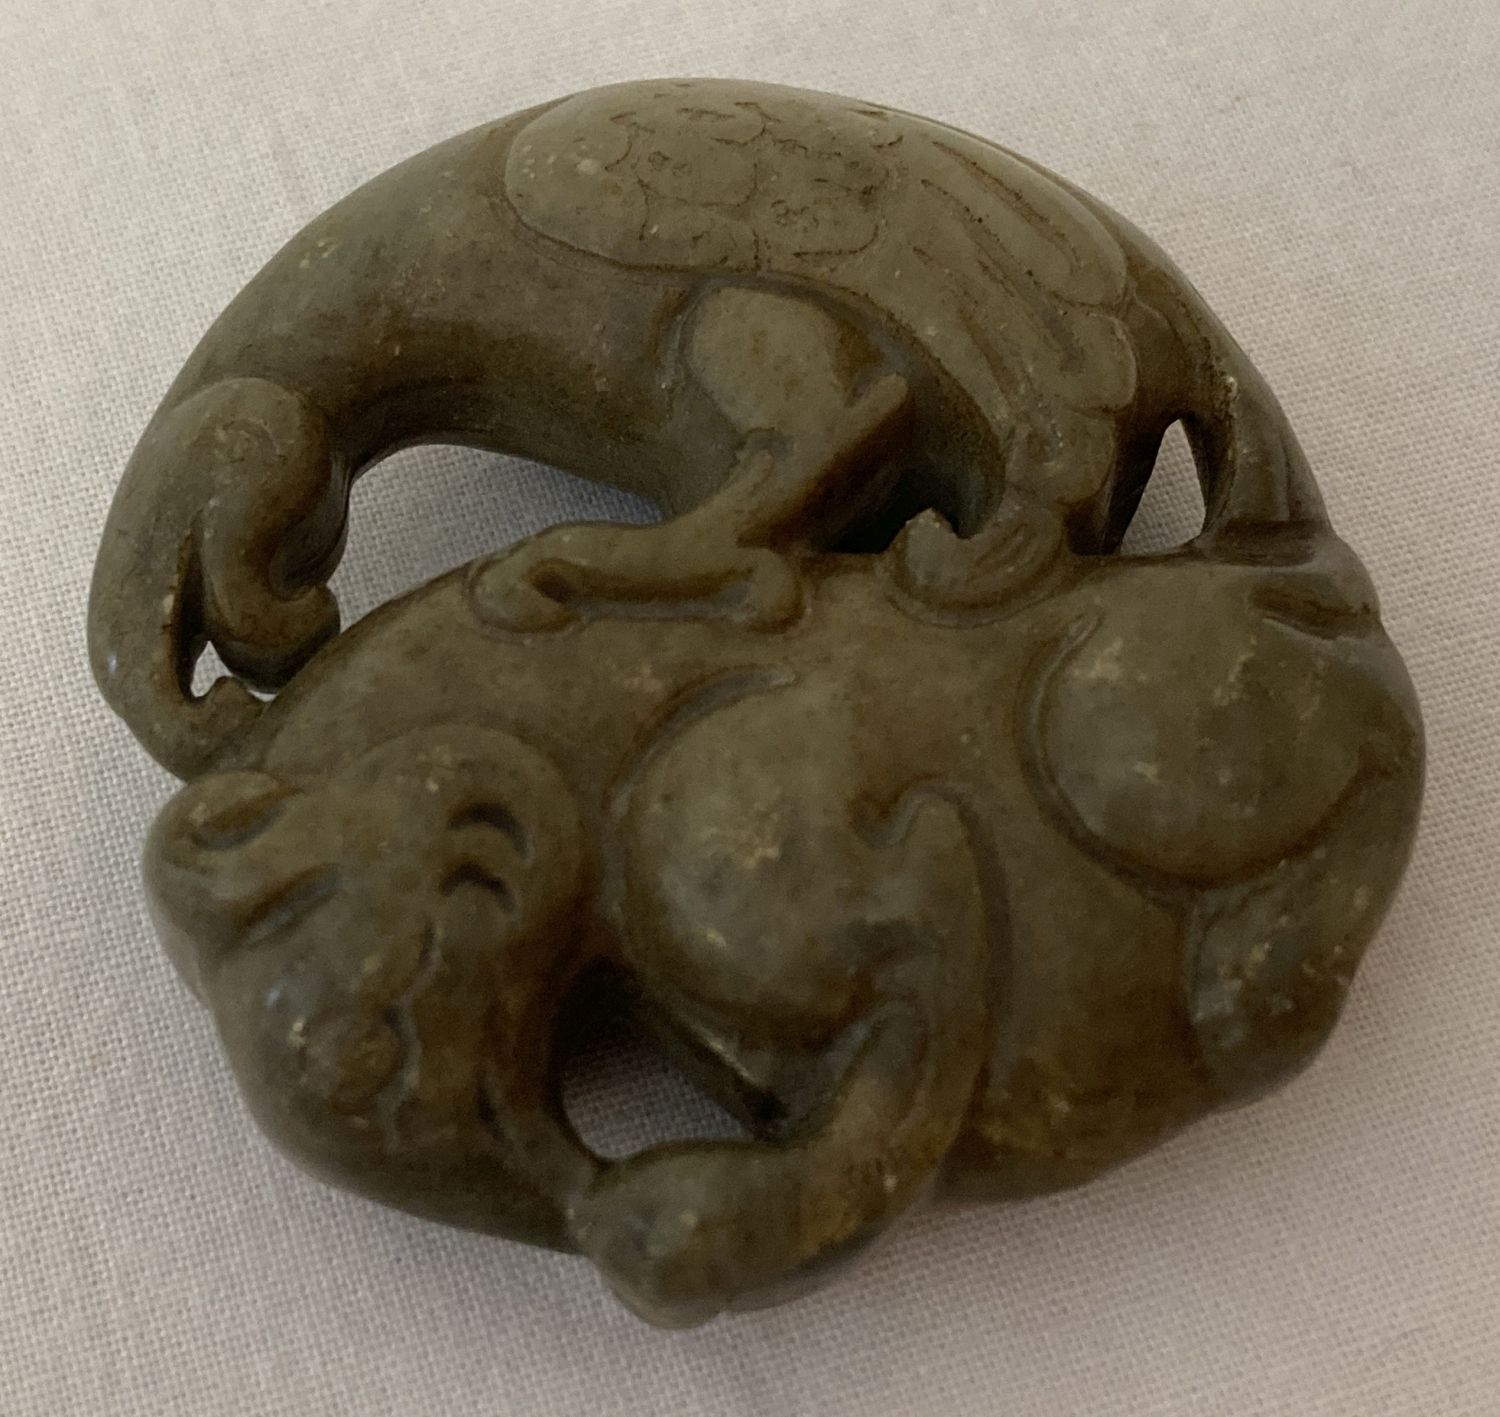 A Chinese Jade roundel depicting Mythical creatures. Carved detail to both side.